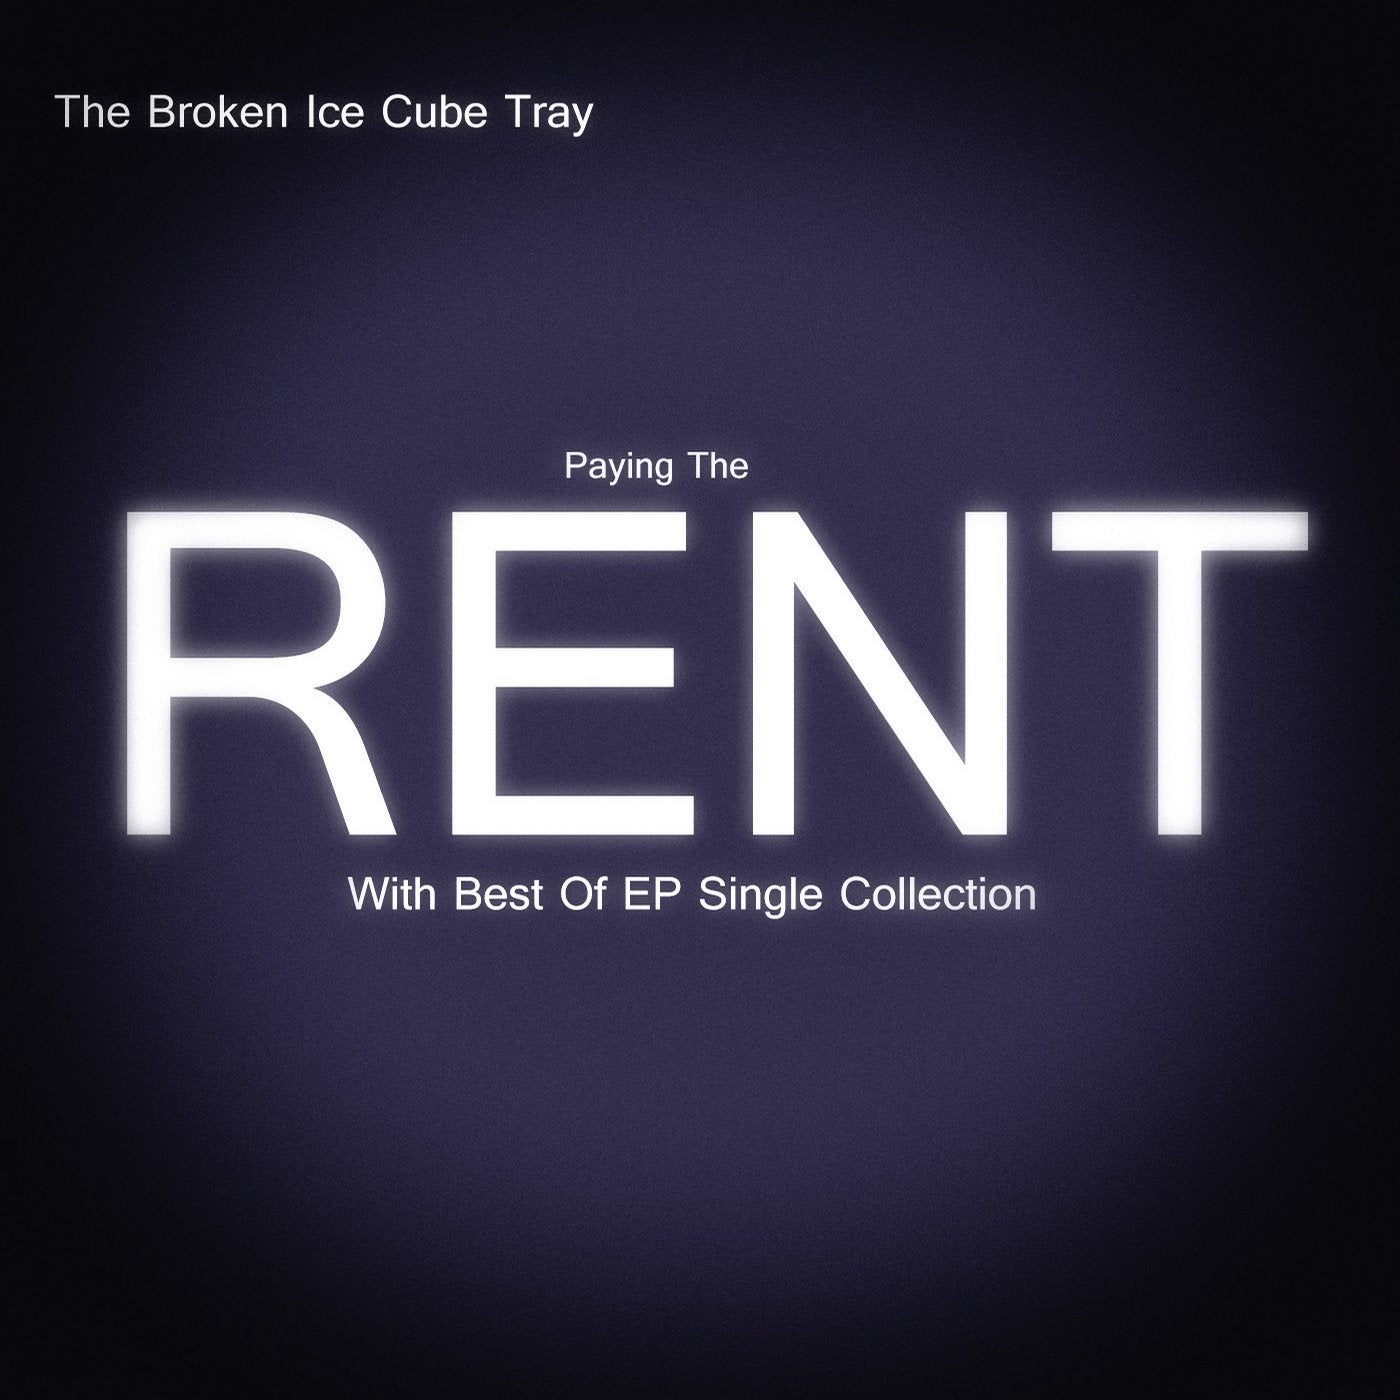 Paying The Rent With Best Of EP Single Collection